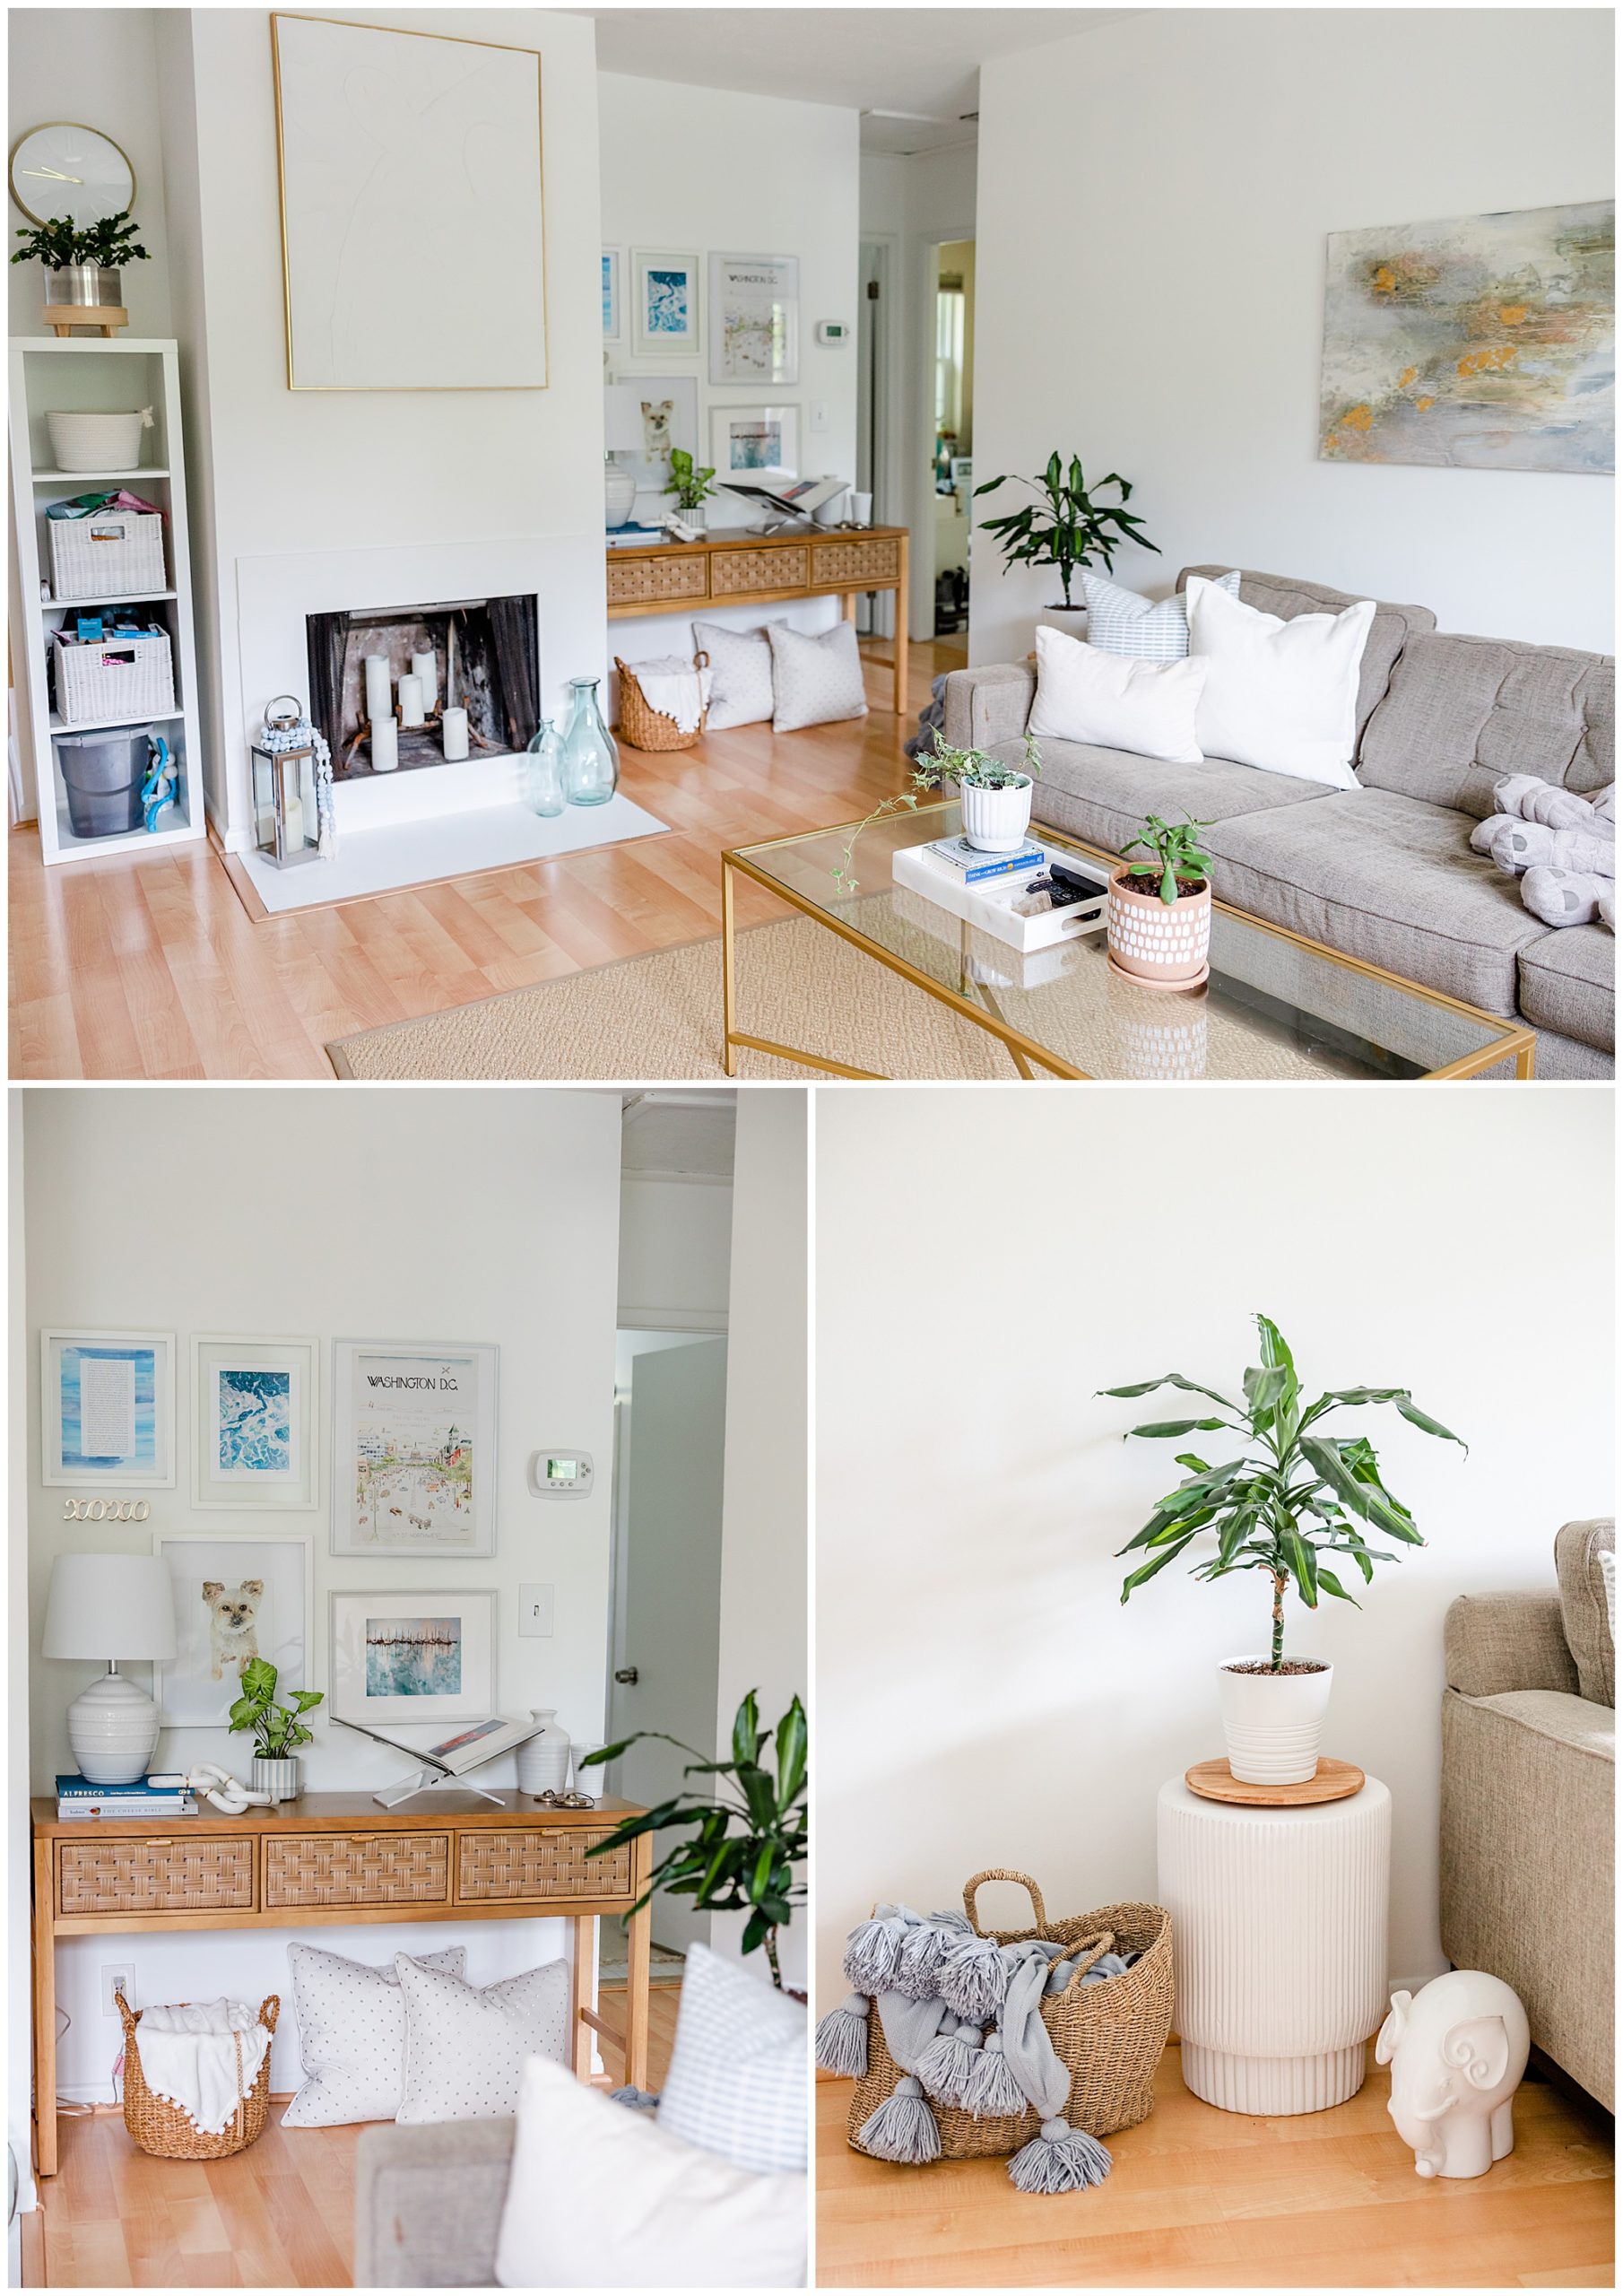 living room tour, apartment tour, photographer's apartment, photographer's life, photographer's aesthetic, Arlington condo living, apartment living, white aesthetic, white and gold aesthetic, condo decor, small space decorating, minimalist decor, subtle beach decor, Rachel E.H. Photography, DC photographer, fireplace with candles, gray couch, plant on side table, basket for blankets